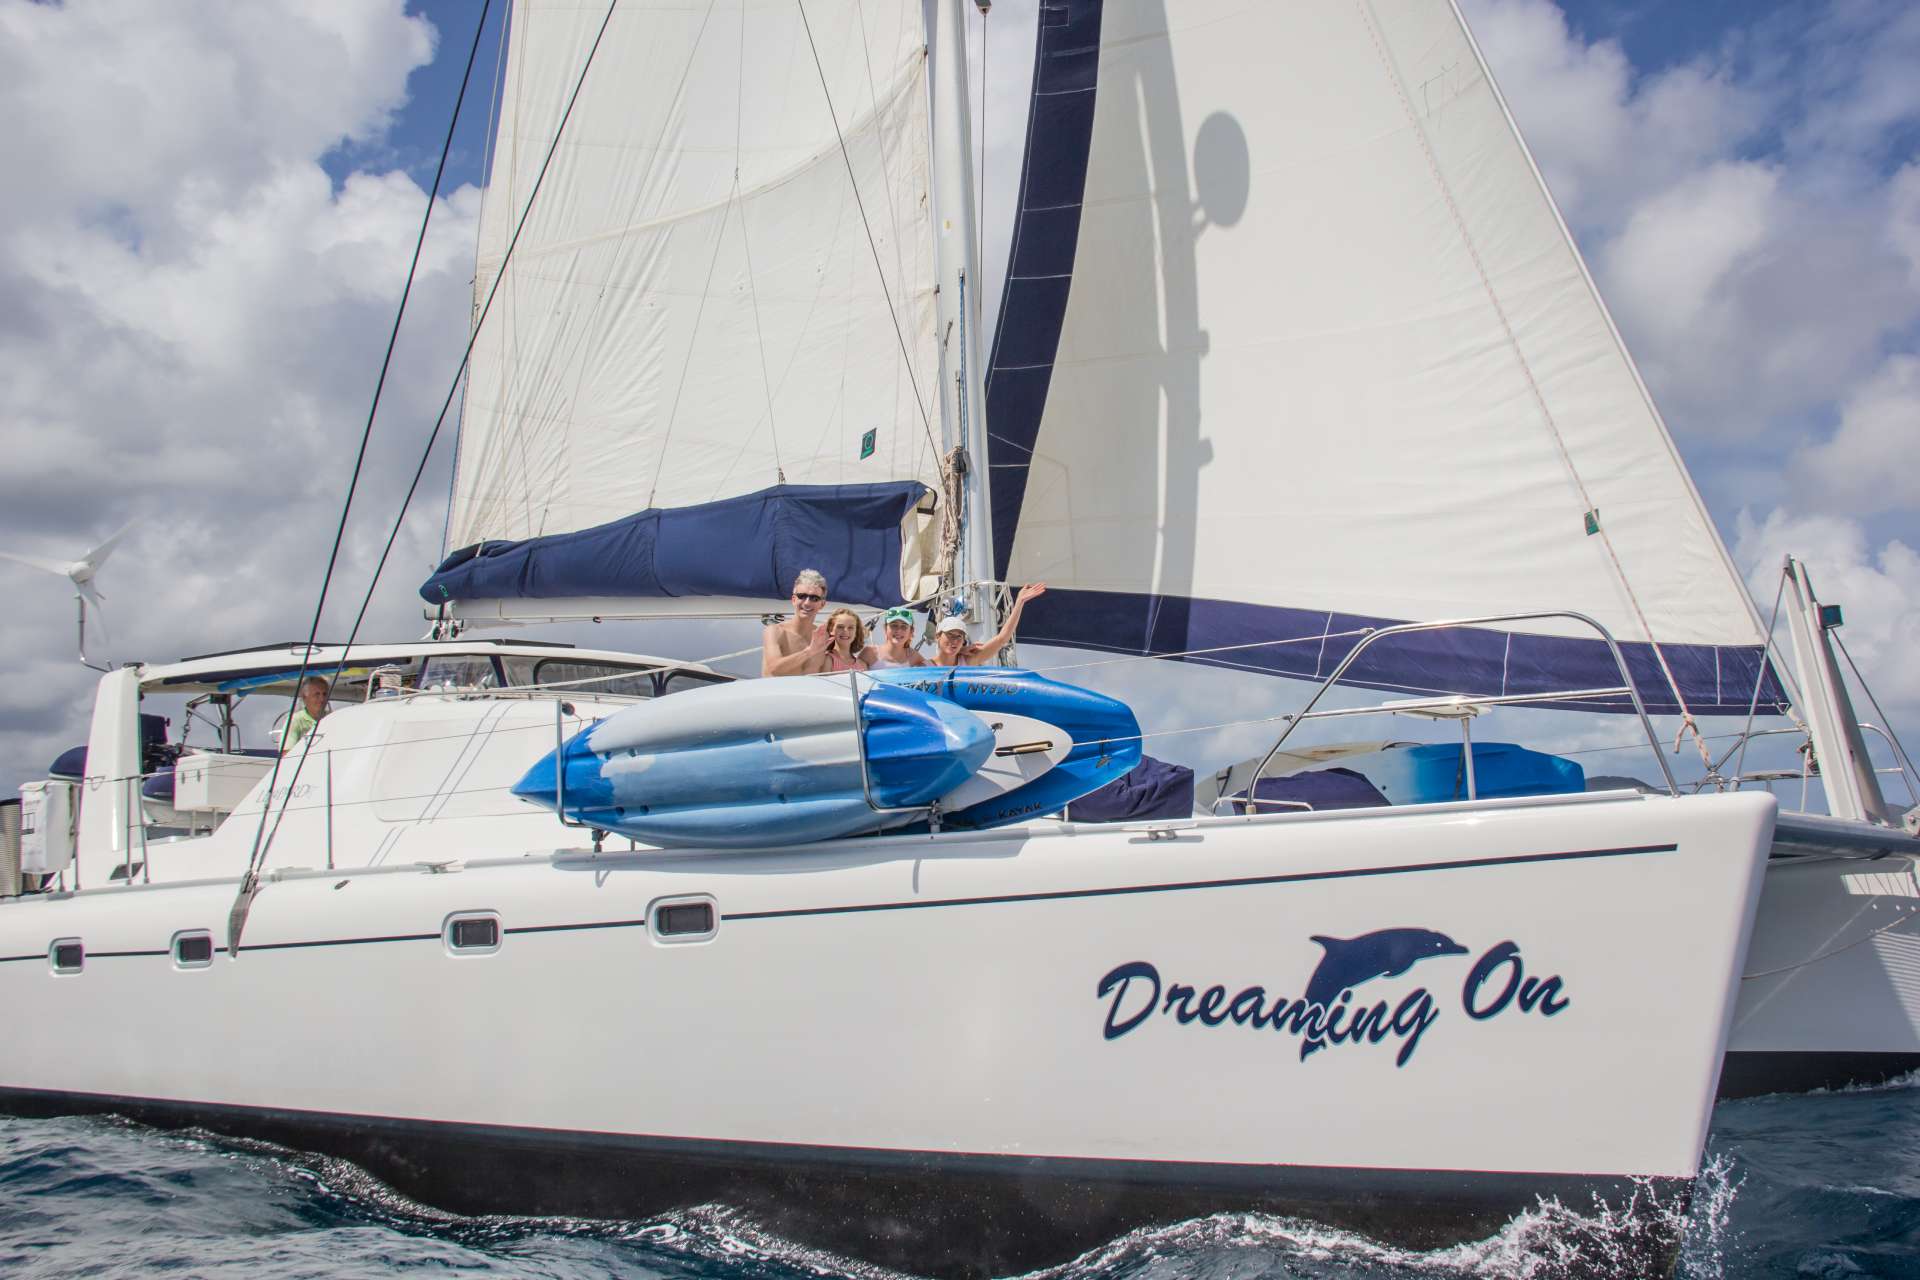 dreaming on - Catamaran Charter Belize & Boat hire in Central america, Belize 2